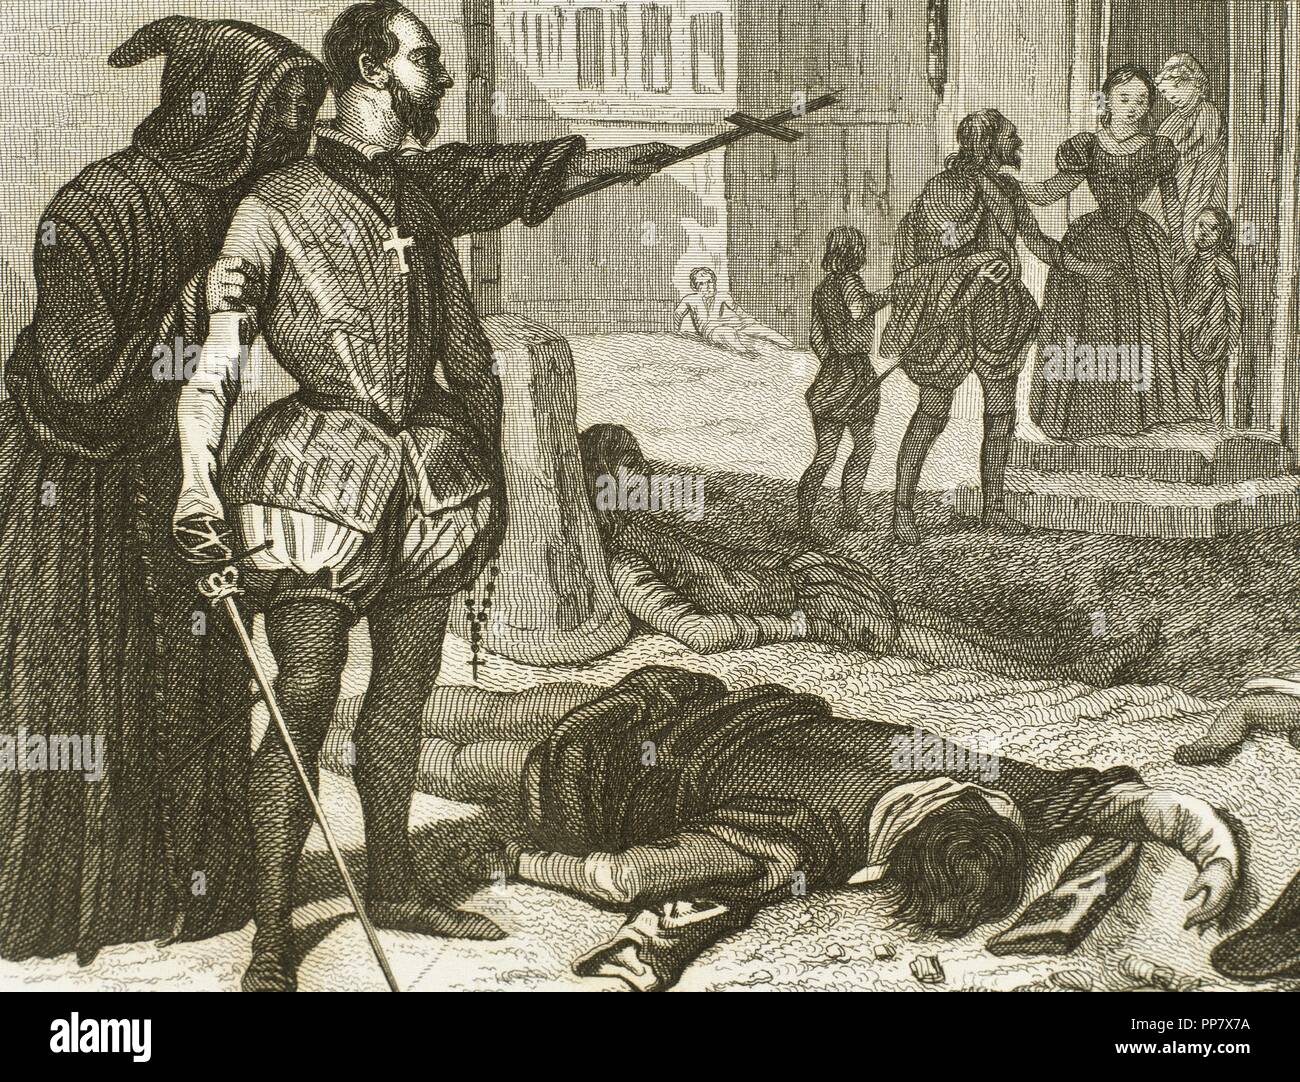 France. French Wars of Religion. St. Batholomew's Day massacre, 1572. Assassinations of Catholic violence against the Huguenots, the French Calvinist Protestants. Engraving. 19th century. Stock Photo